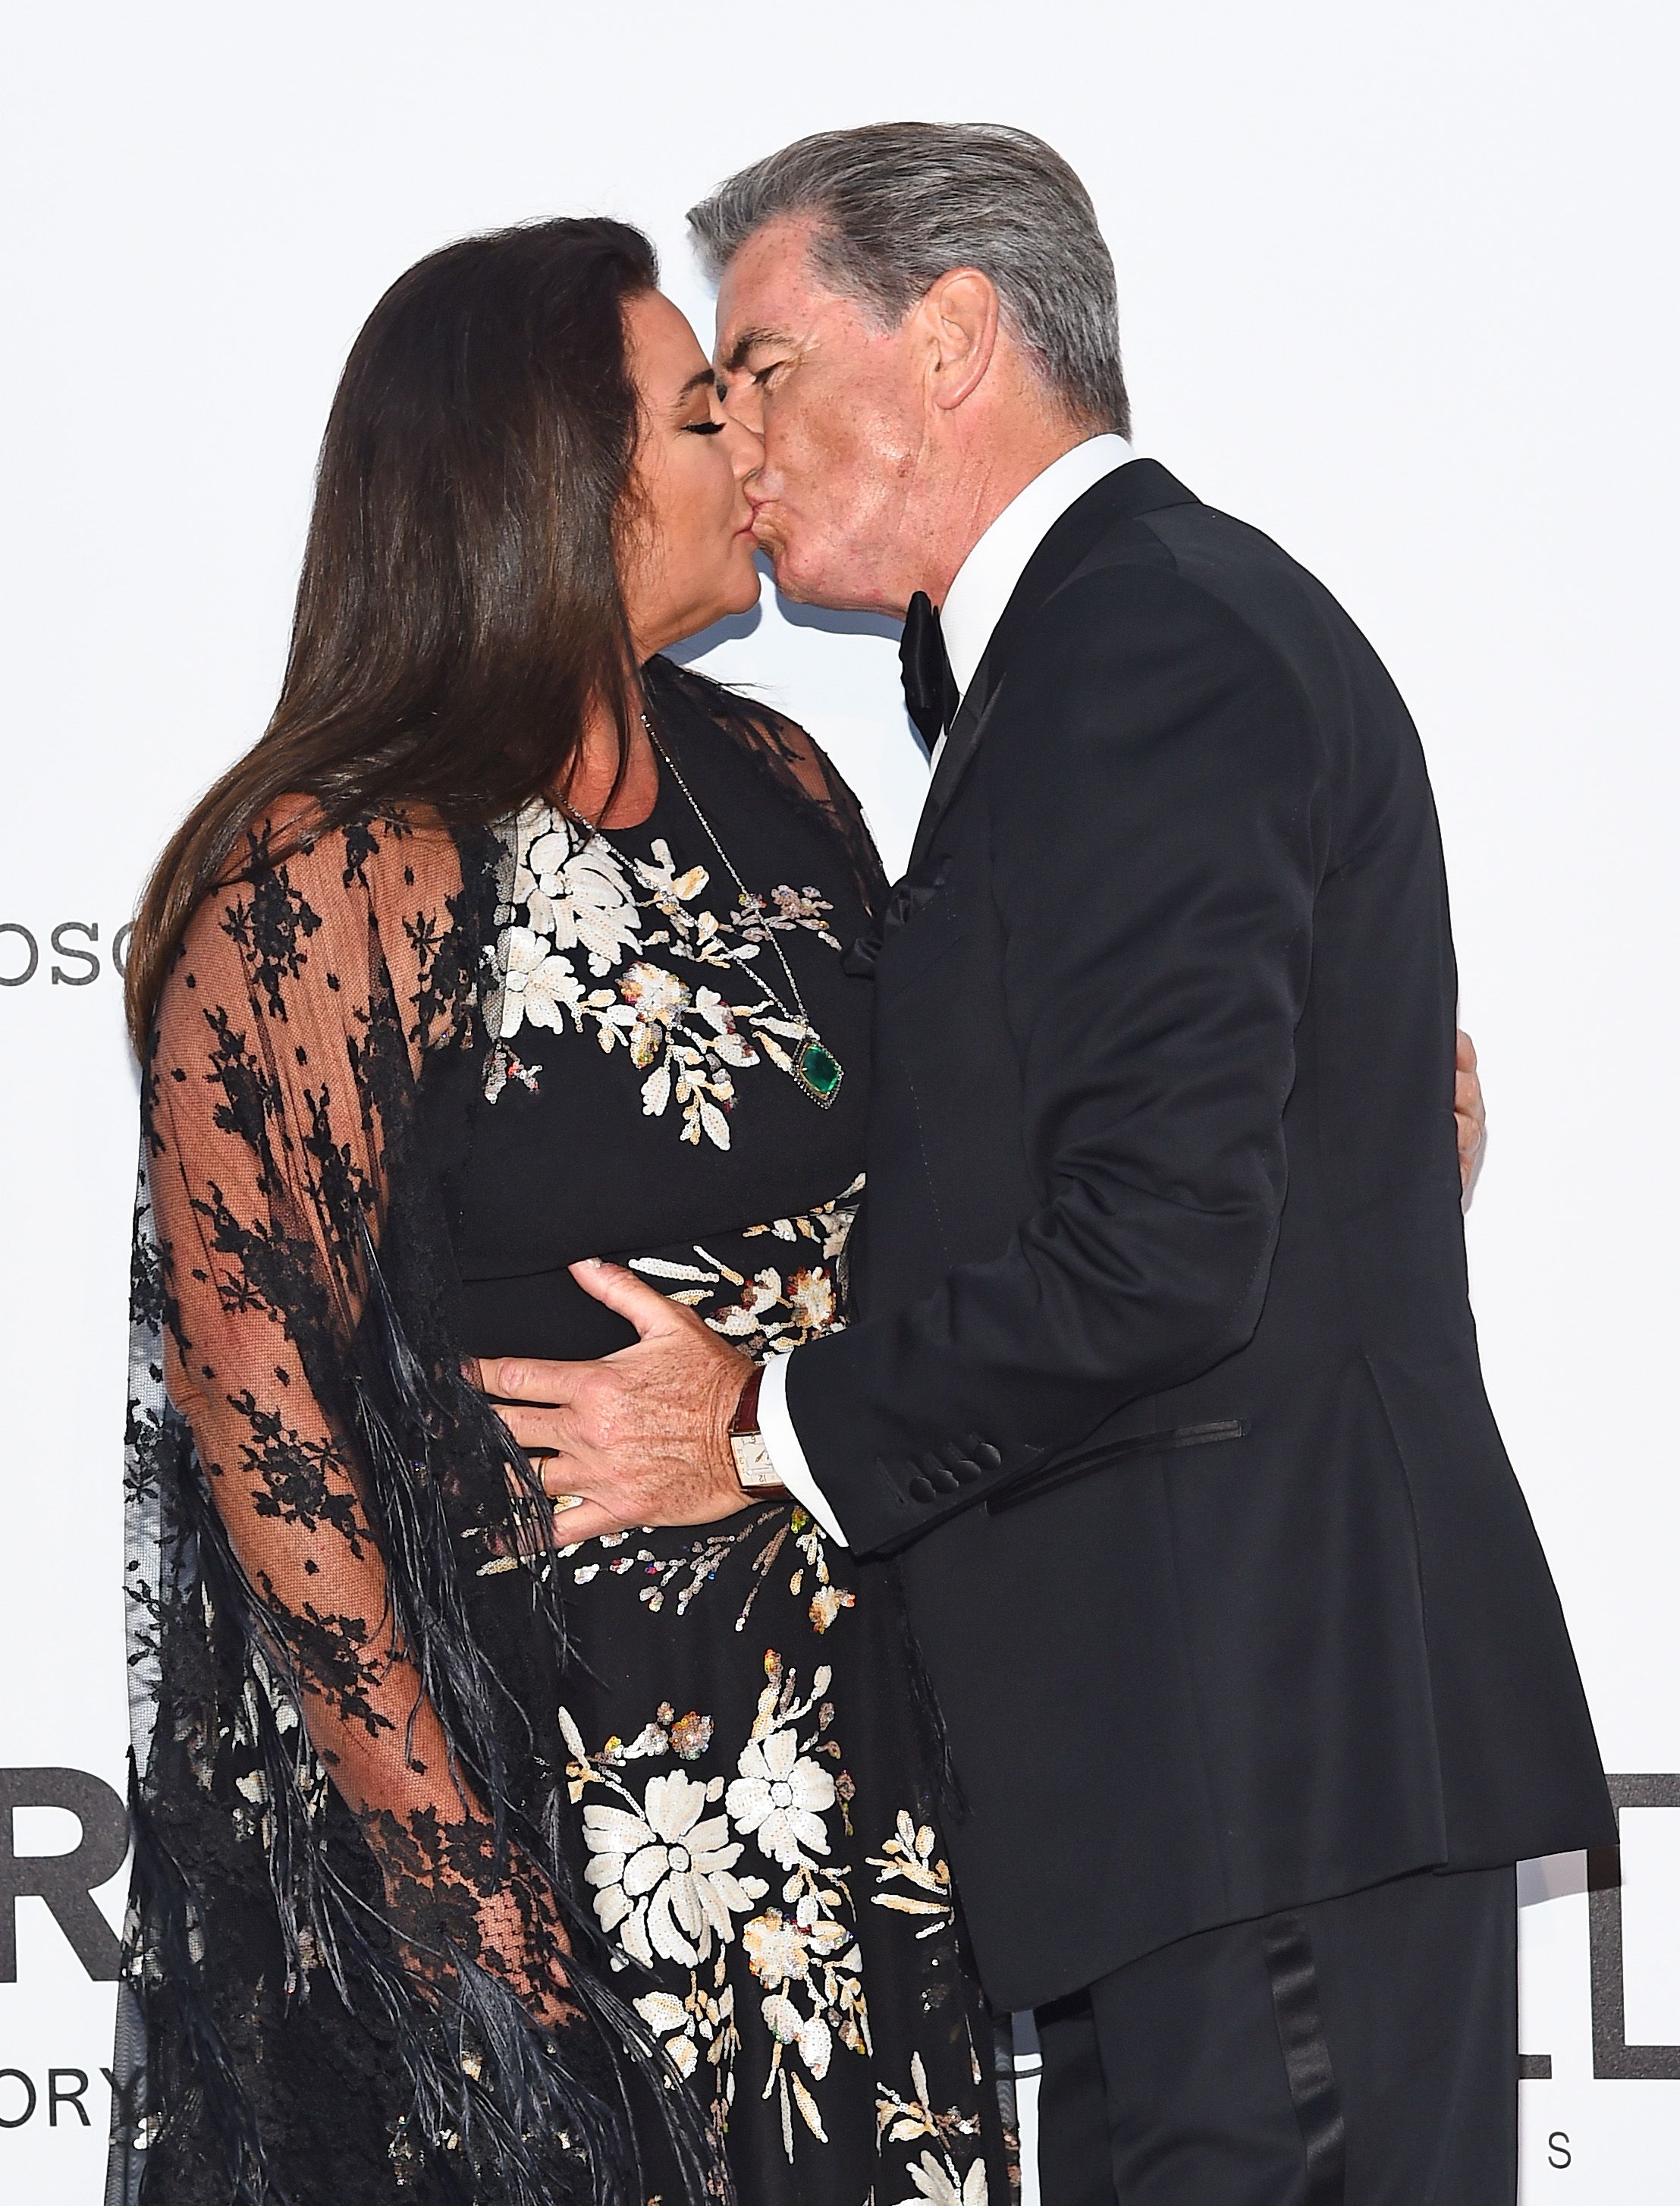 Pierce Brosnan and Keely Shaye Brosnan during the amfAR Gala Cannes 2018 at Hotel du Cap-Eden-Roc on May 17, 2018, in Cap d'Antibes, France. | Source: Getty Images